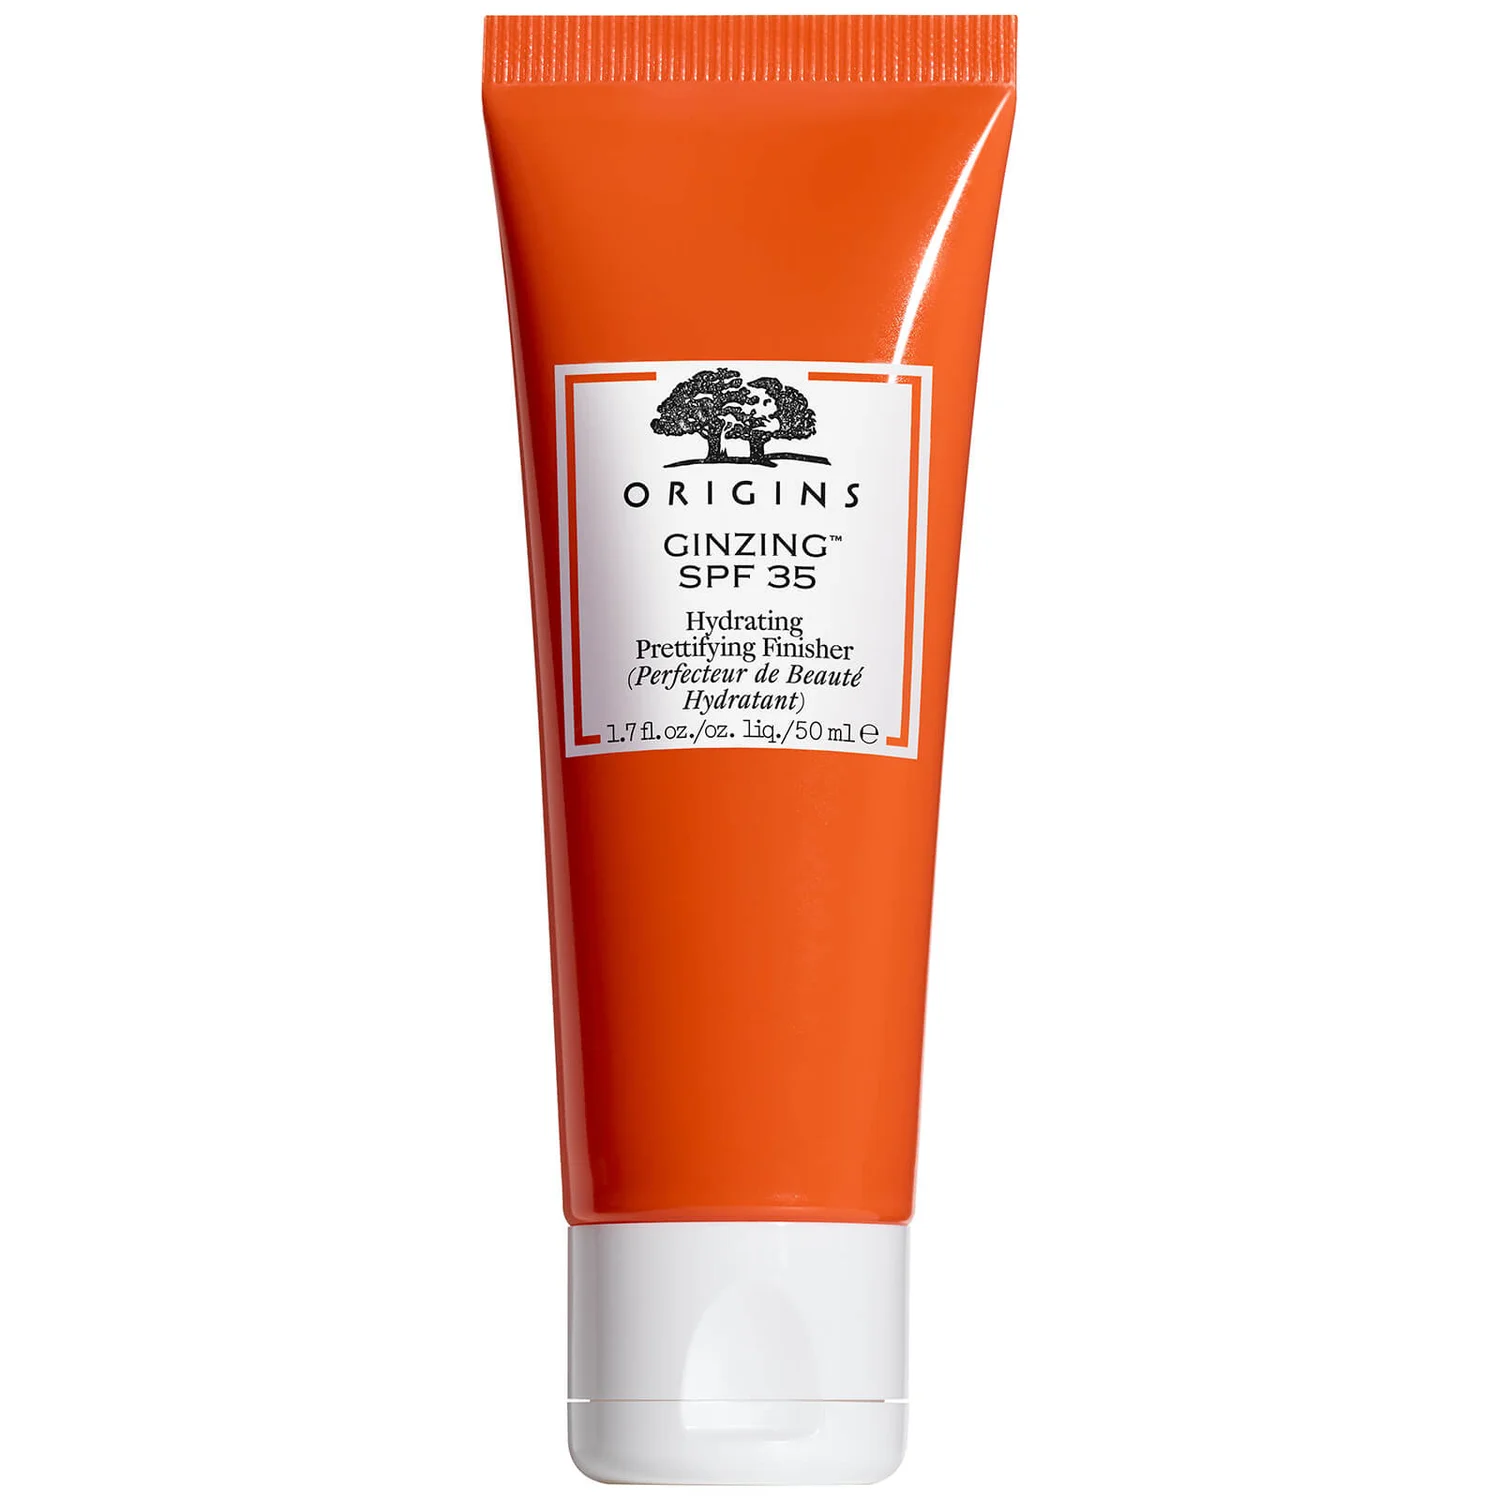 Origins Ginzing™ SPF 35 Hydrating Prettifying Finisher How to stop sweating your make up off at the gym